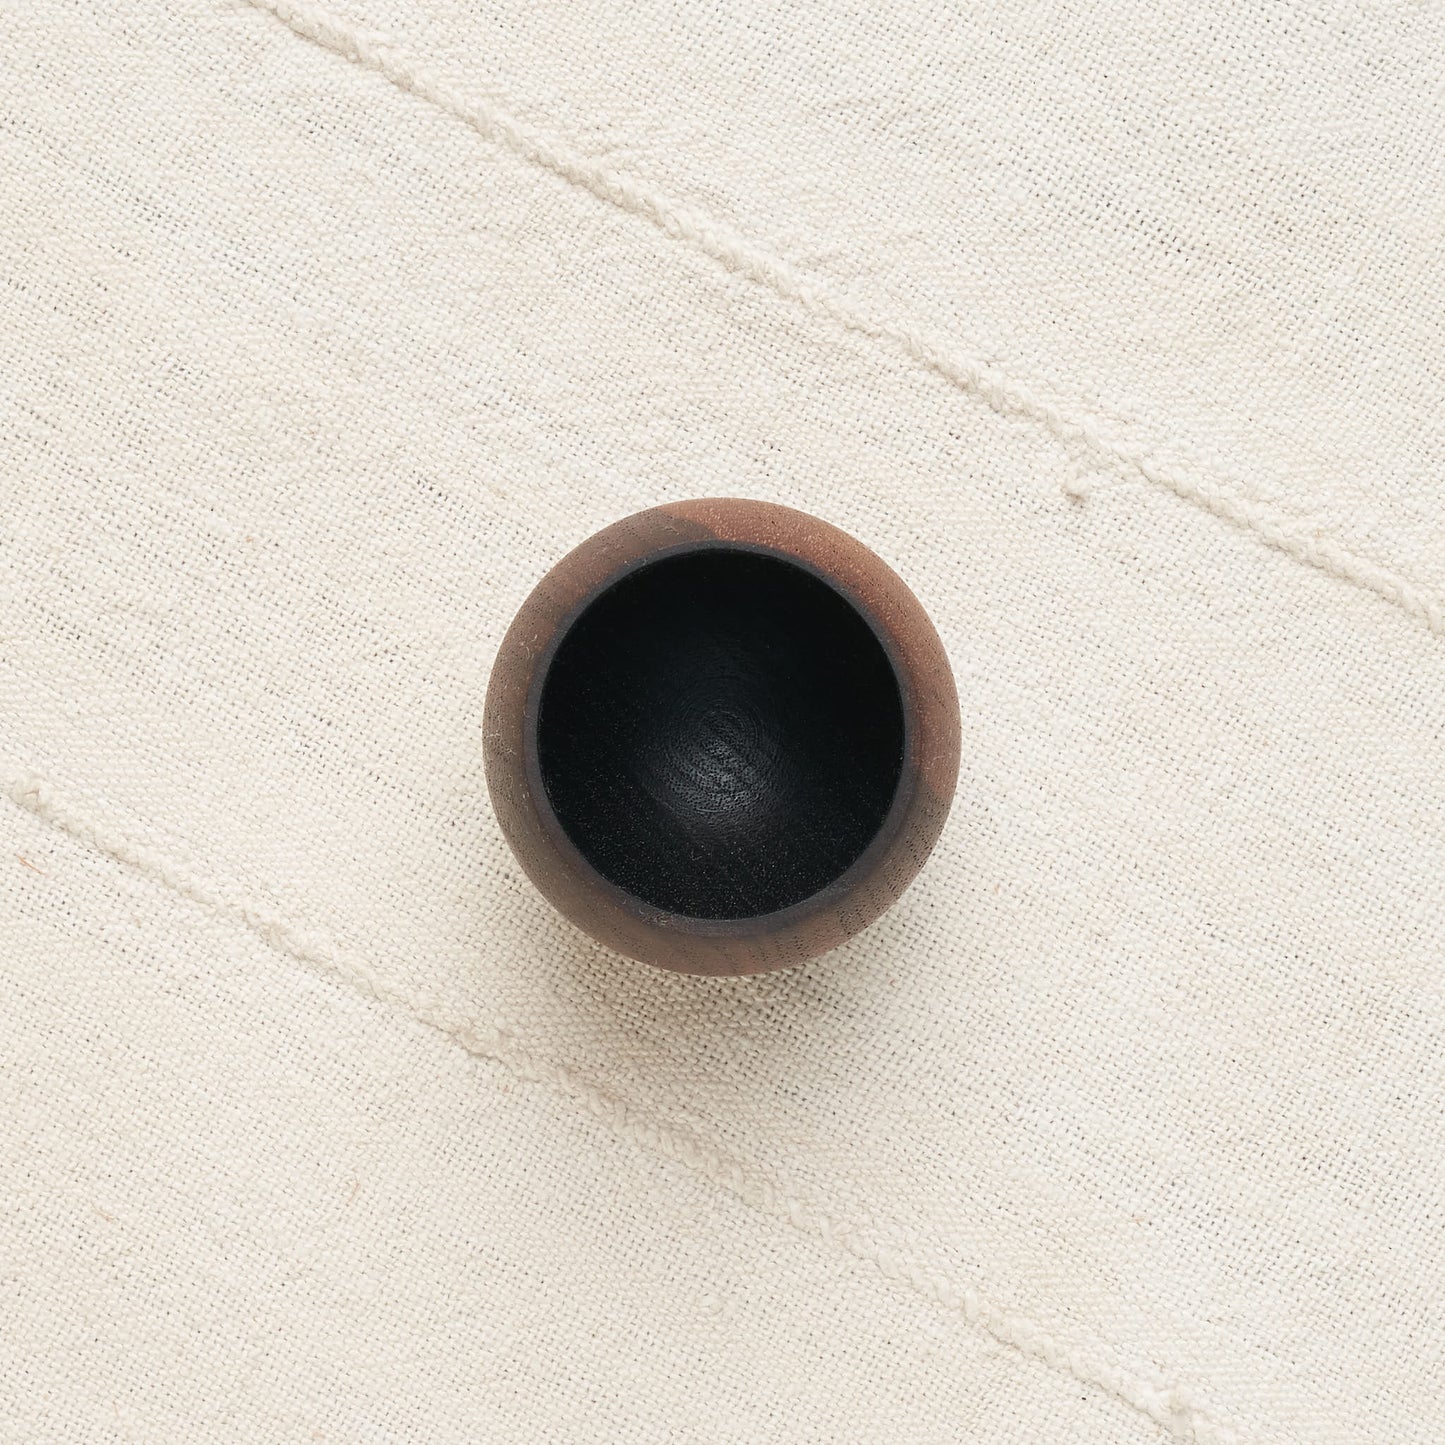 Sphere Charred Cup in Natural Walnut Wood